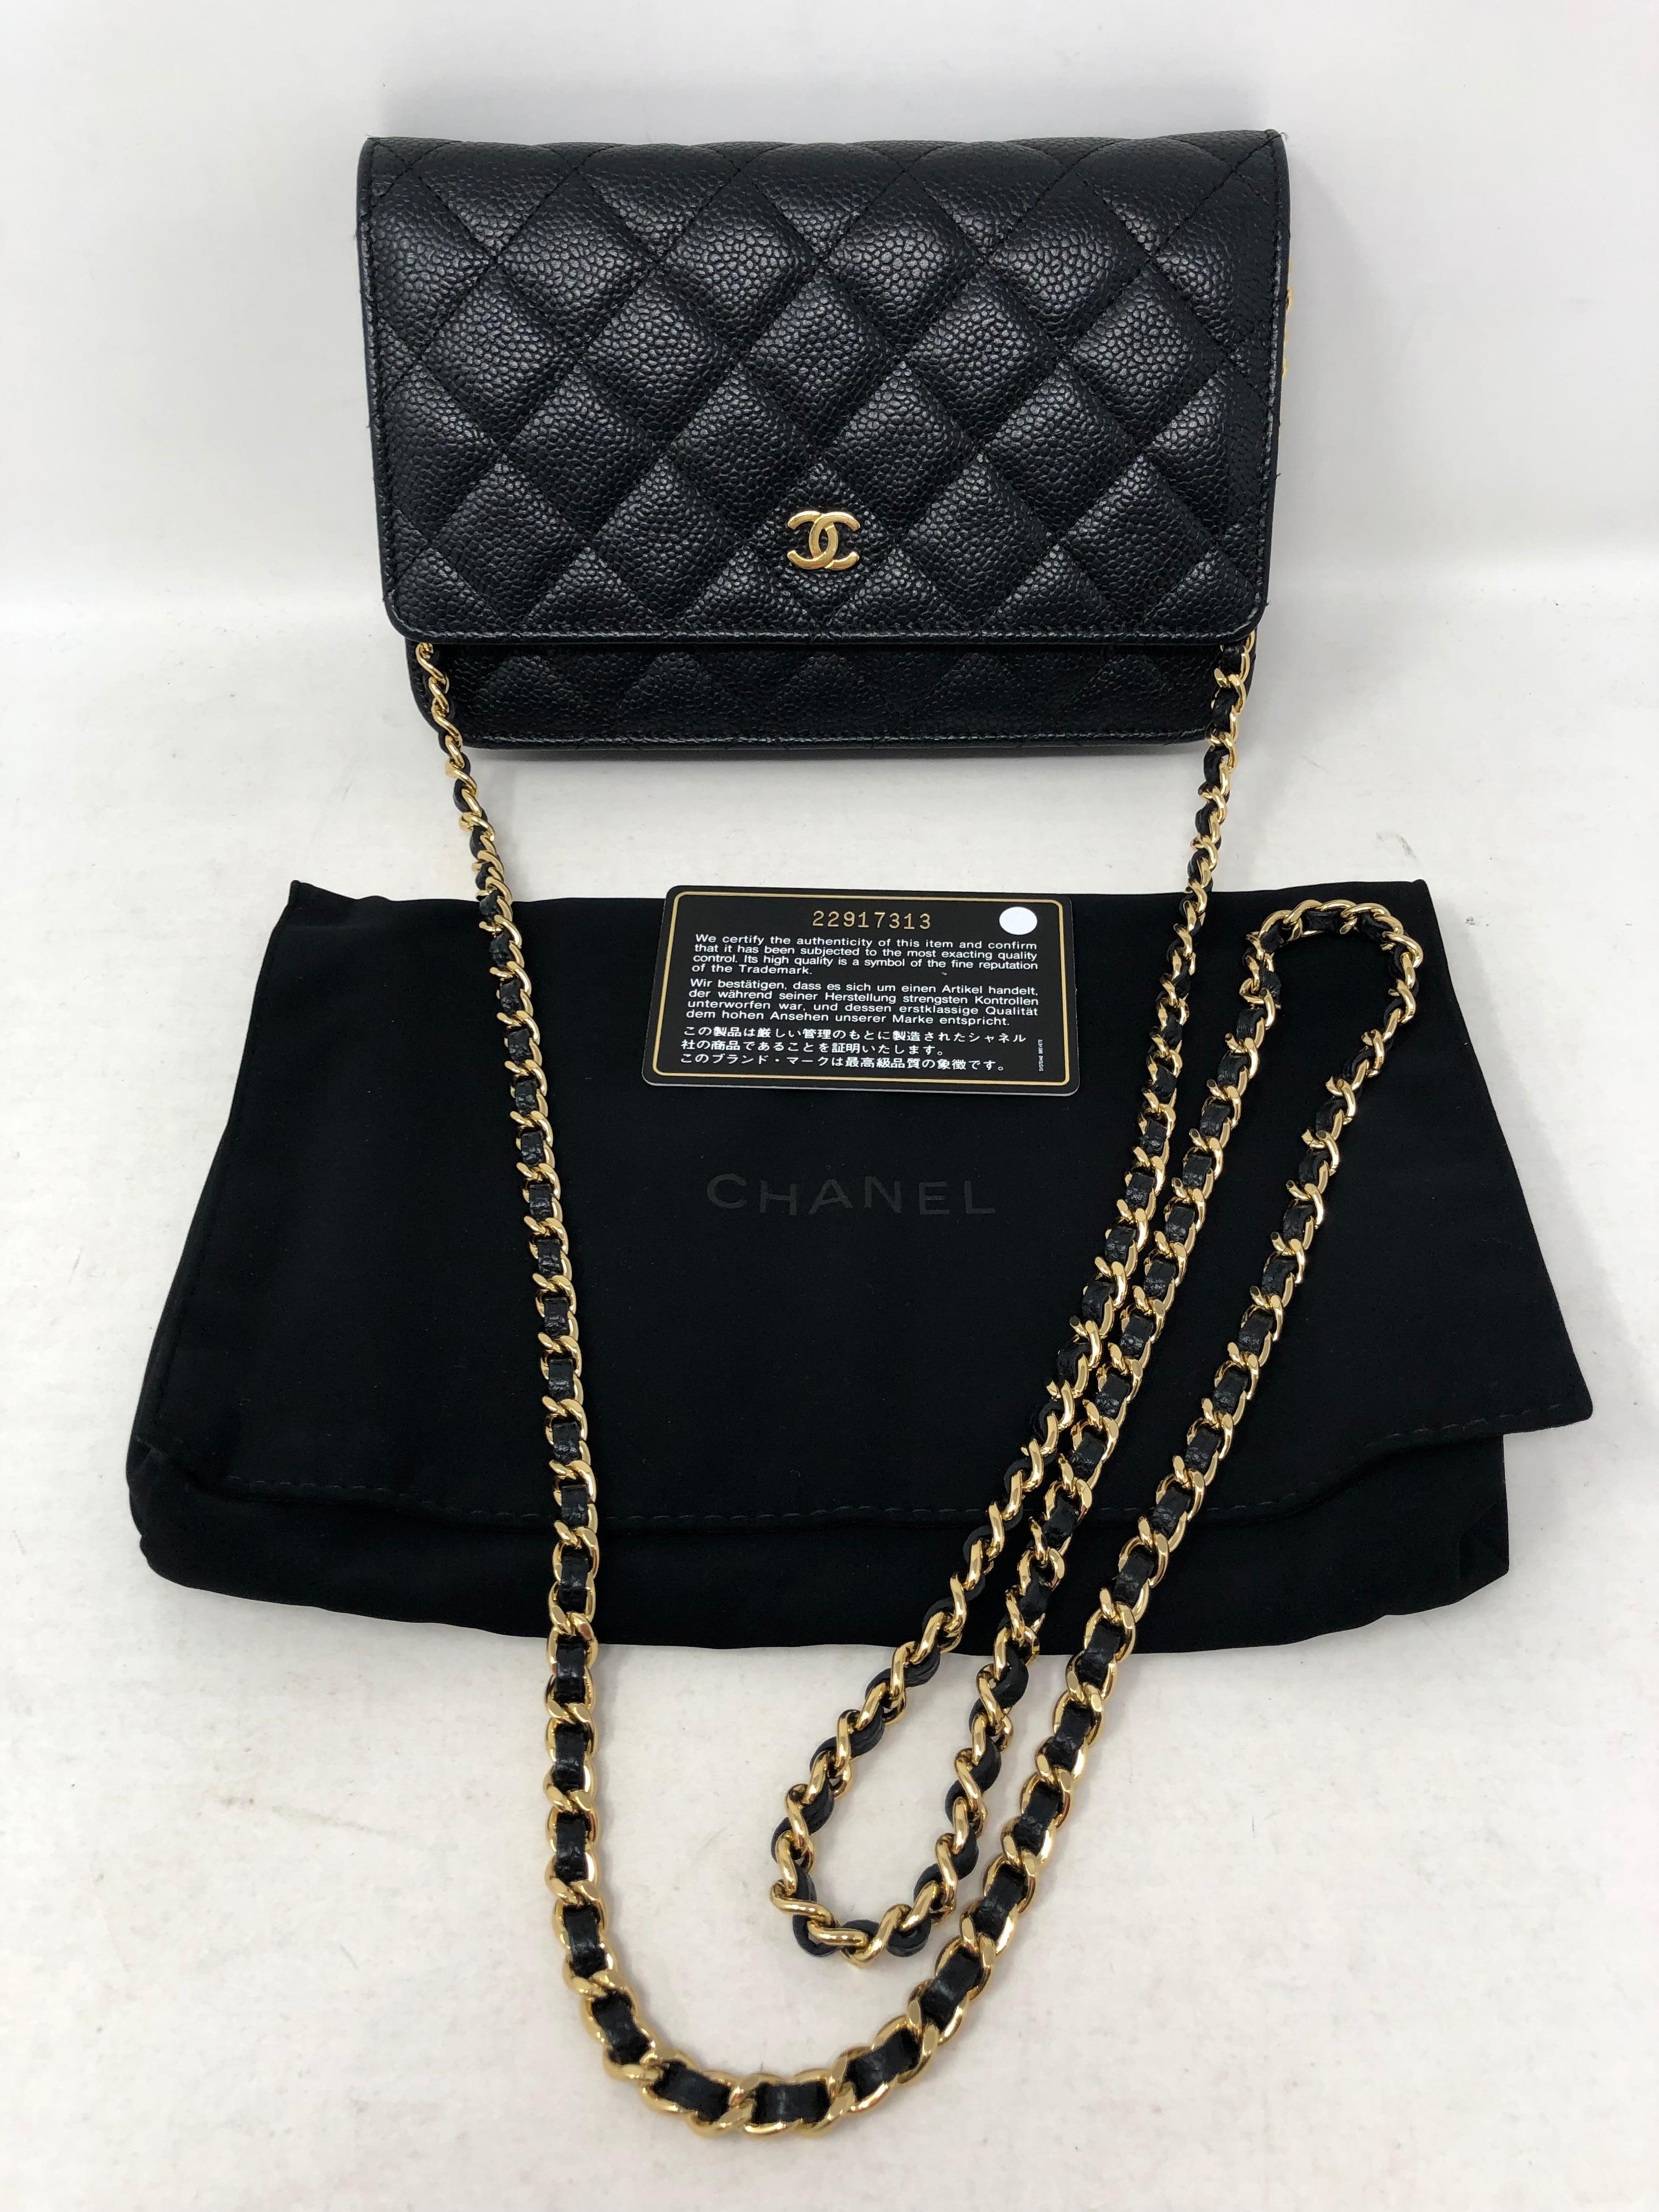 Chanel Black Caviar Leather Wallet On A Chain. Gold hardware. New condition. Never used. Classic style and most wanted. Crossbody or clutch. Gold hardware is mint. Includes dust cover, authenticity card, and box. Guaranteed authentic. 